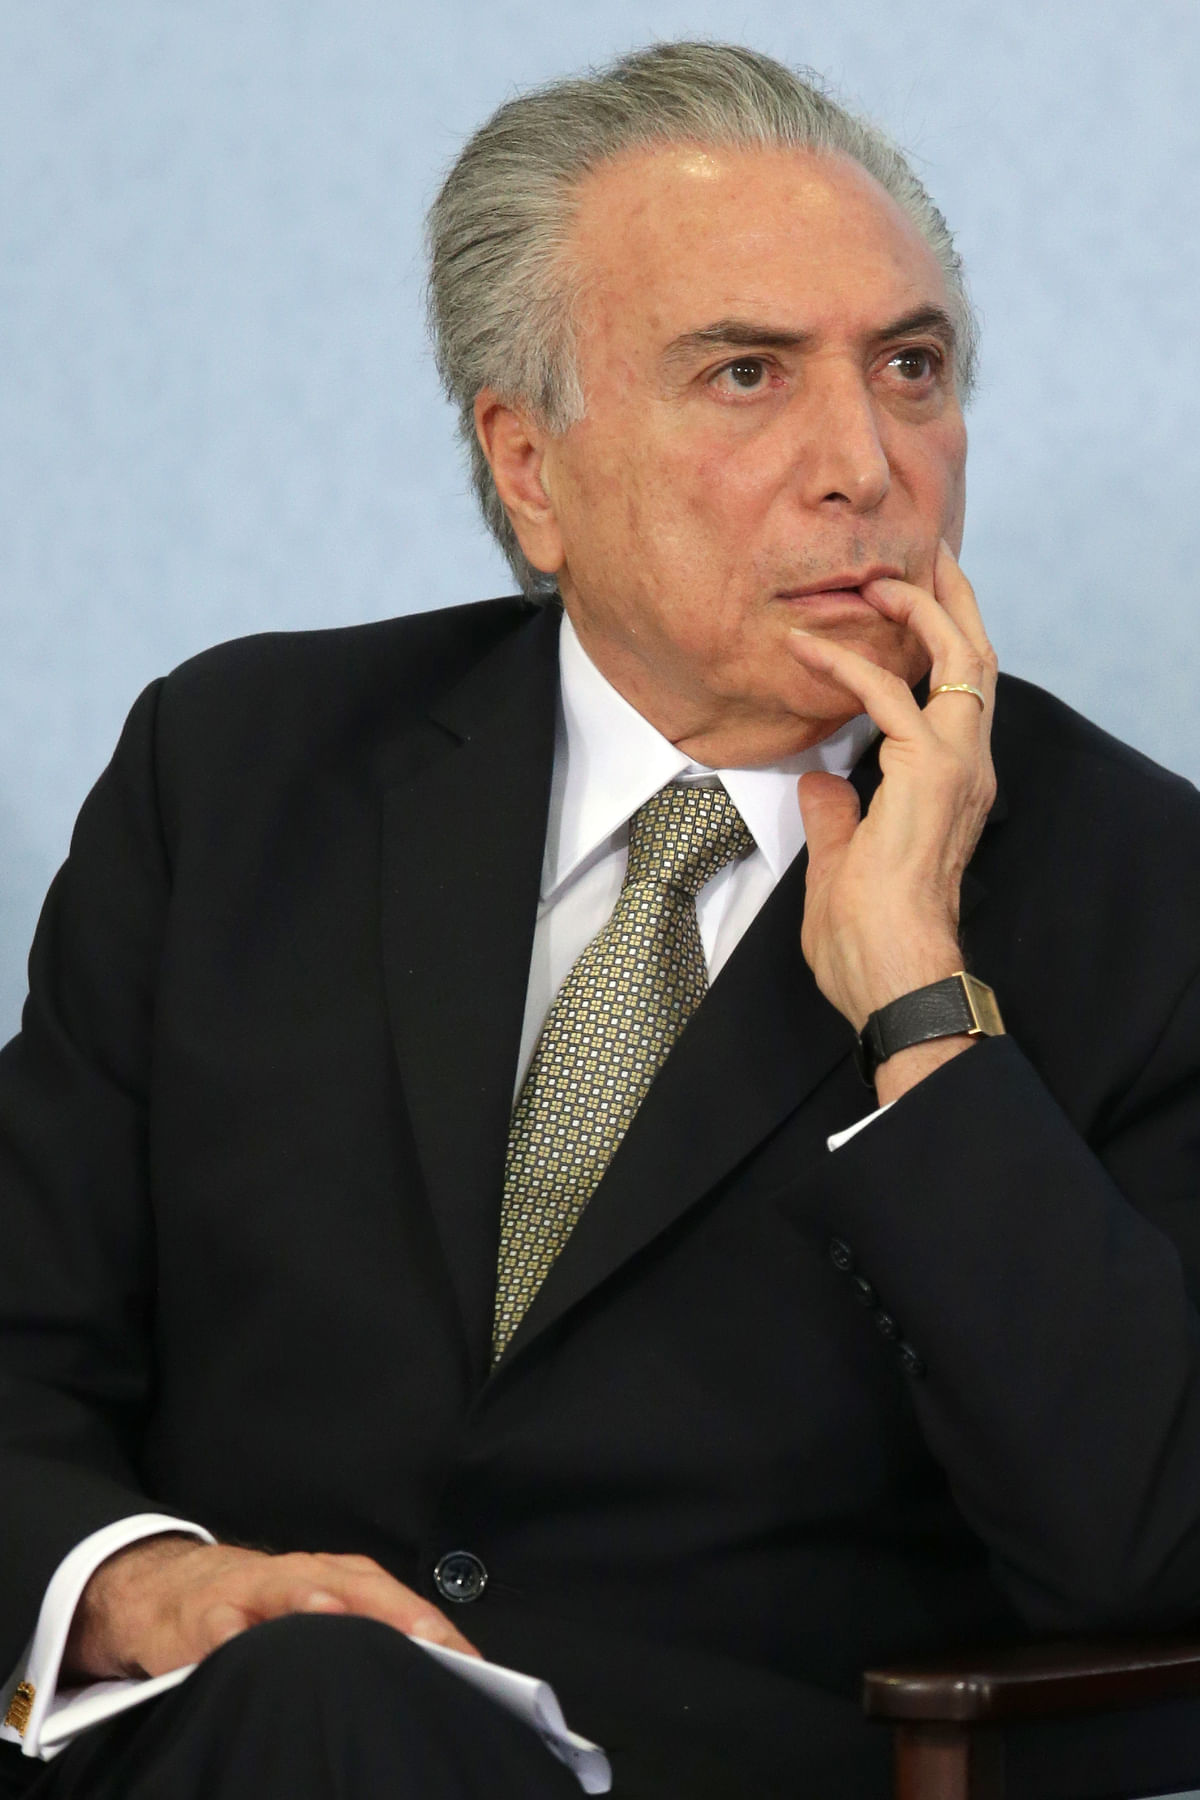  Dilma Rousseff, who called the impeachment a coup, will be replaced by Michel Temer.